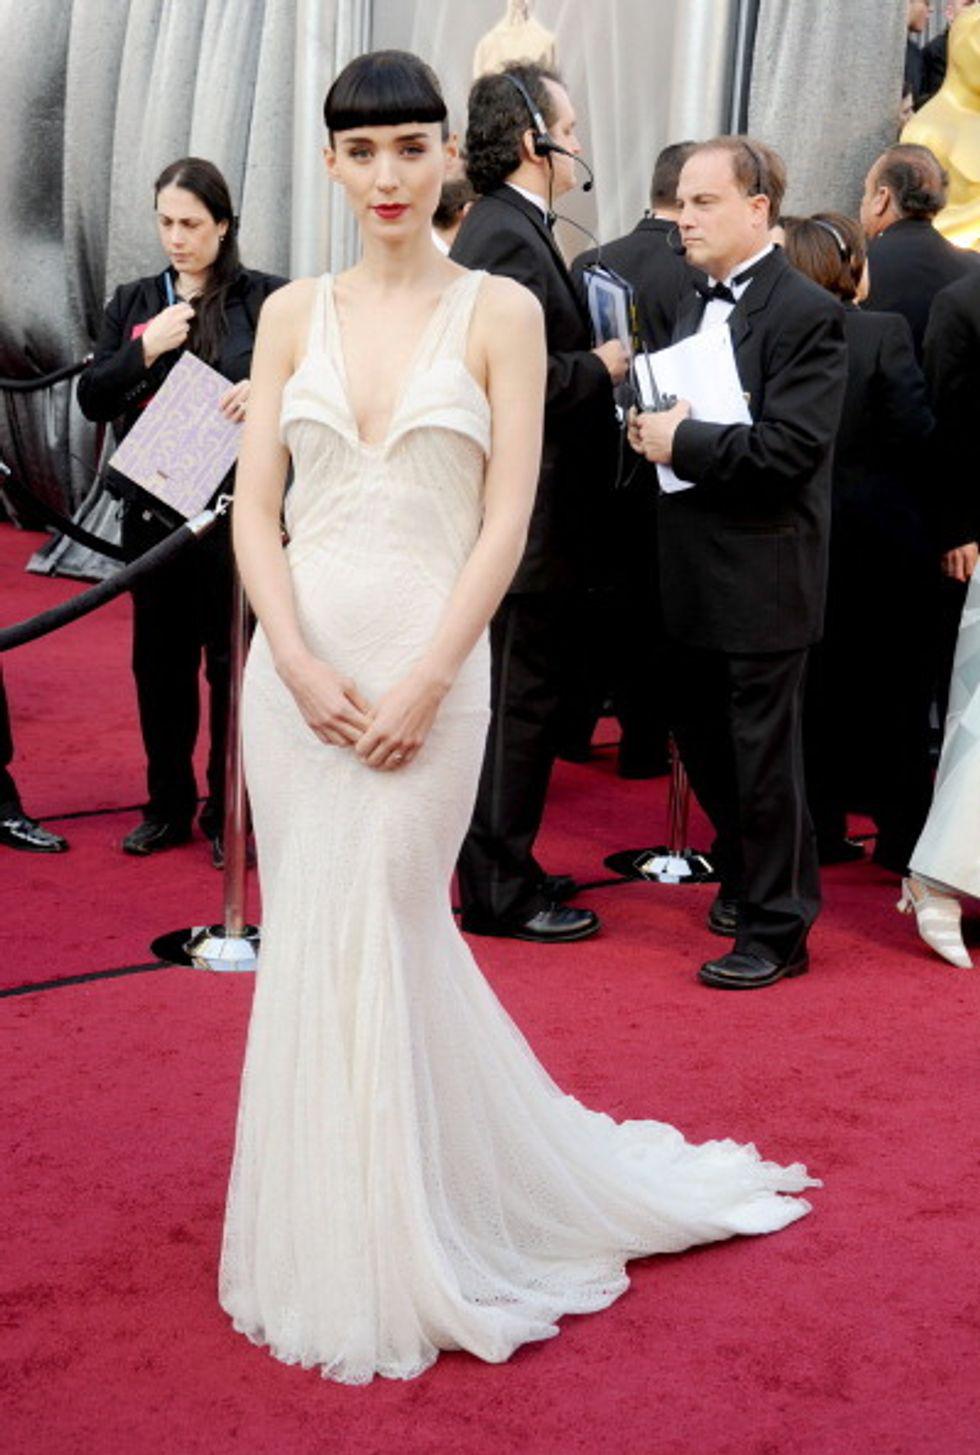 Rooney Mara in Givenchy at the 84th Academy Awards (2012)